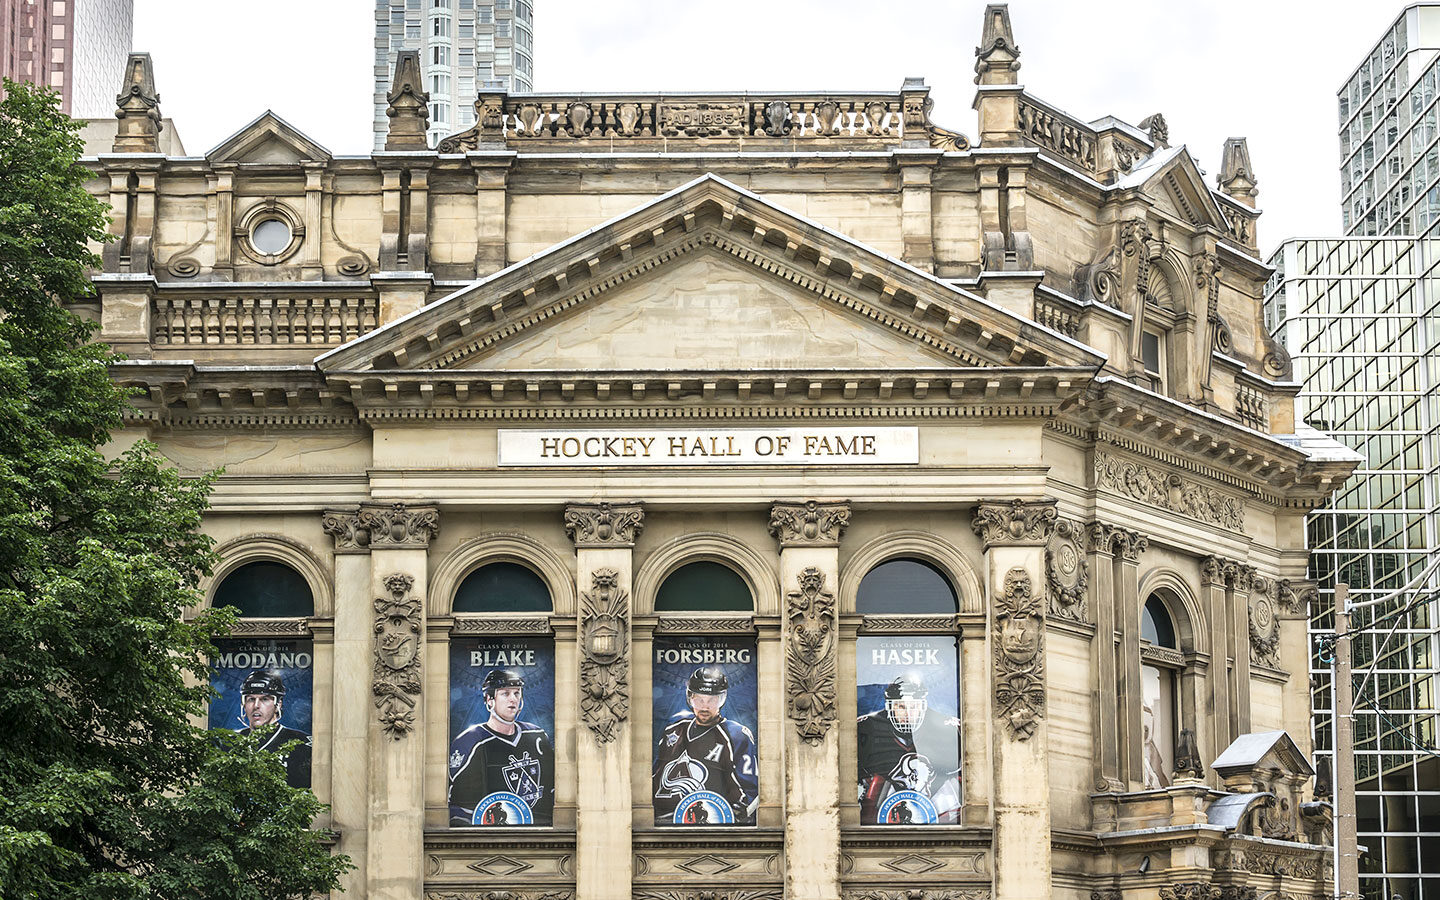 The Hockey Hall of Fame in Toronto, Canada